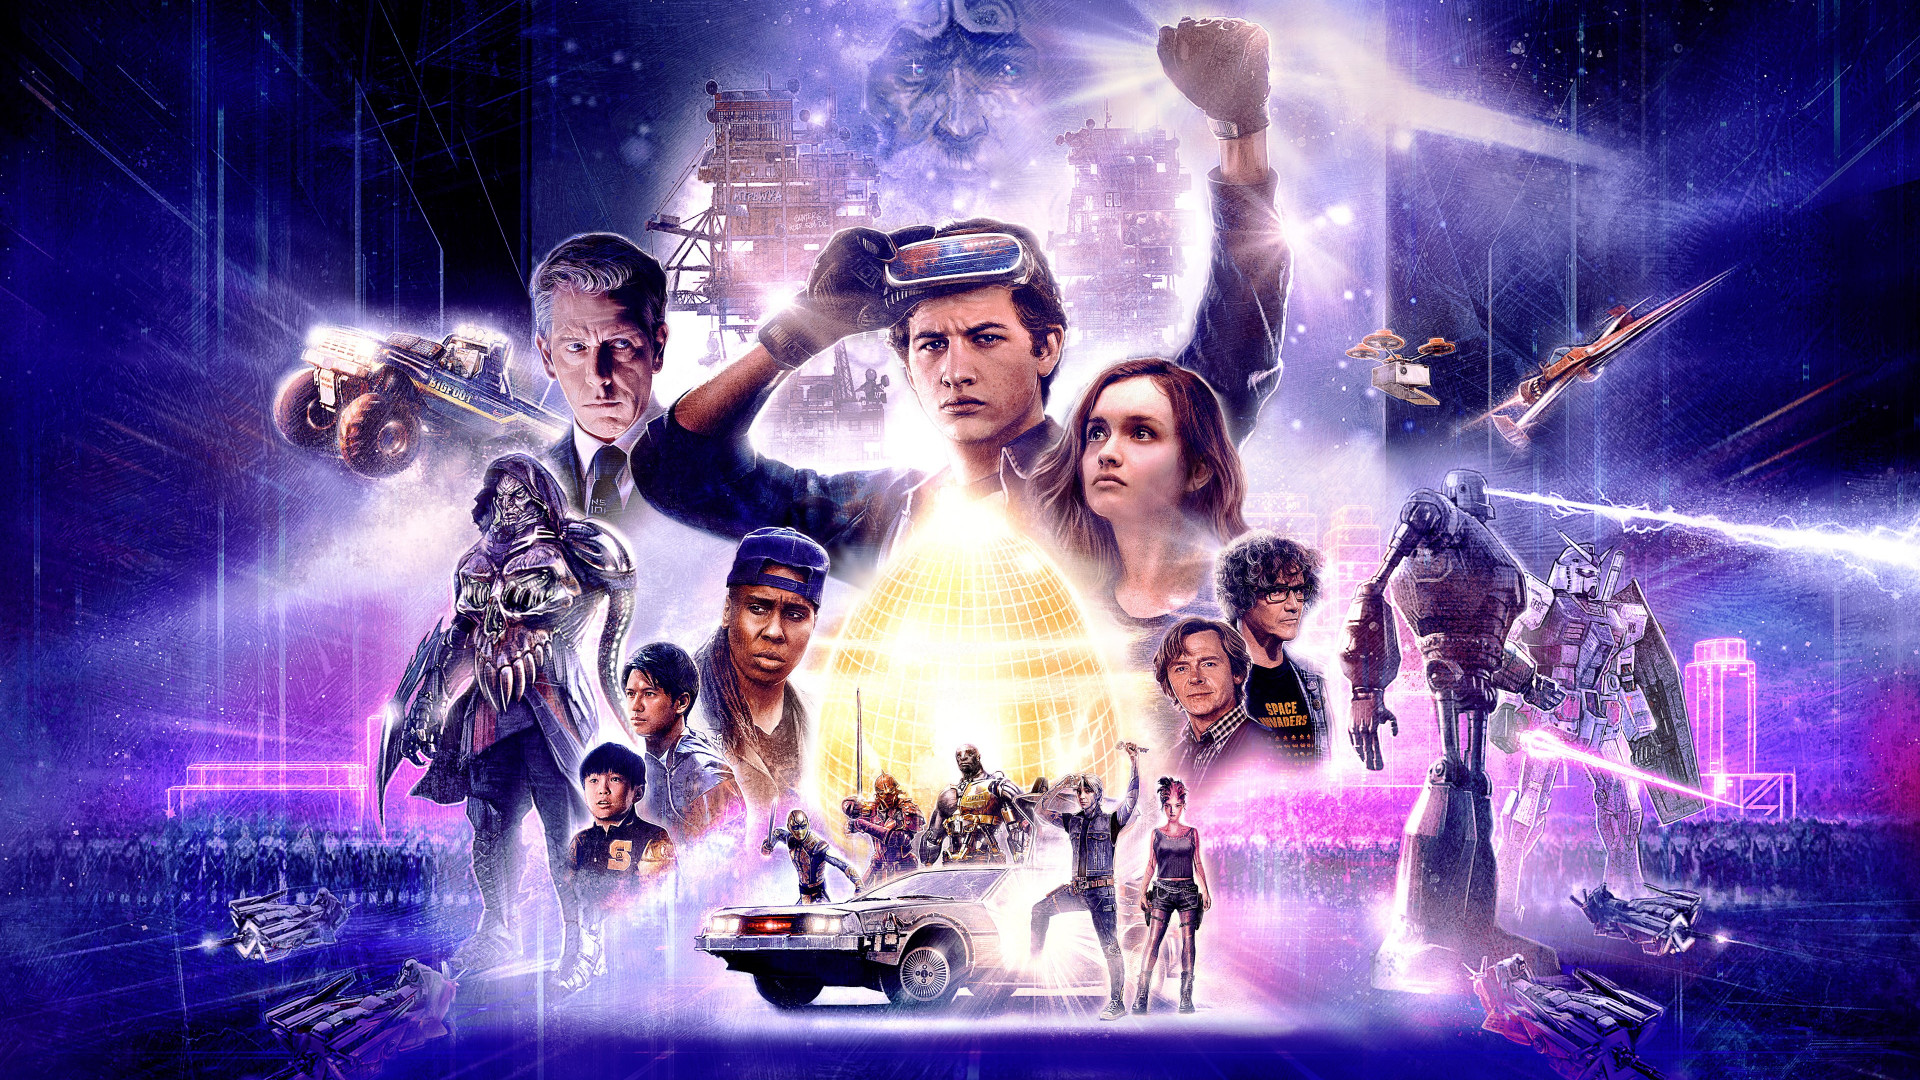 Ready Player One poster wallpaper 1920x1080